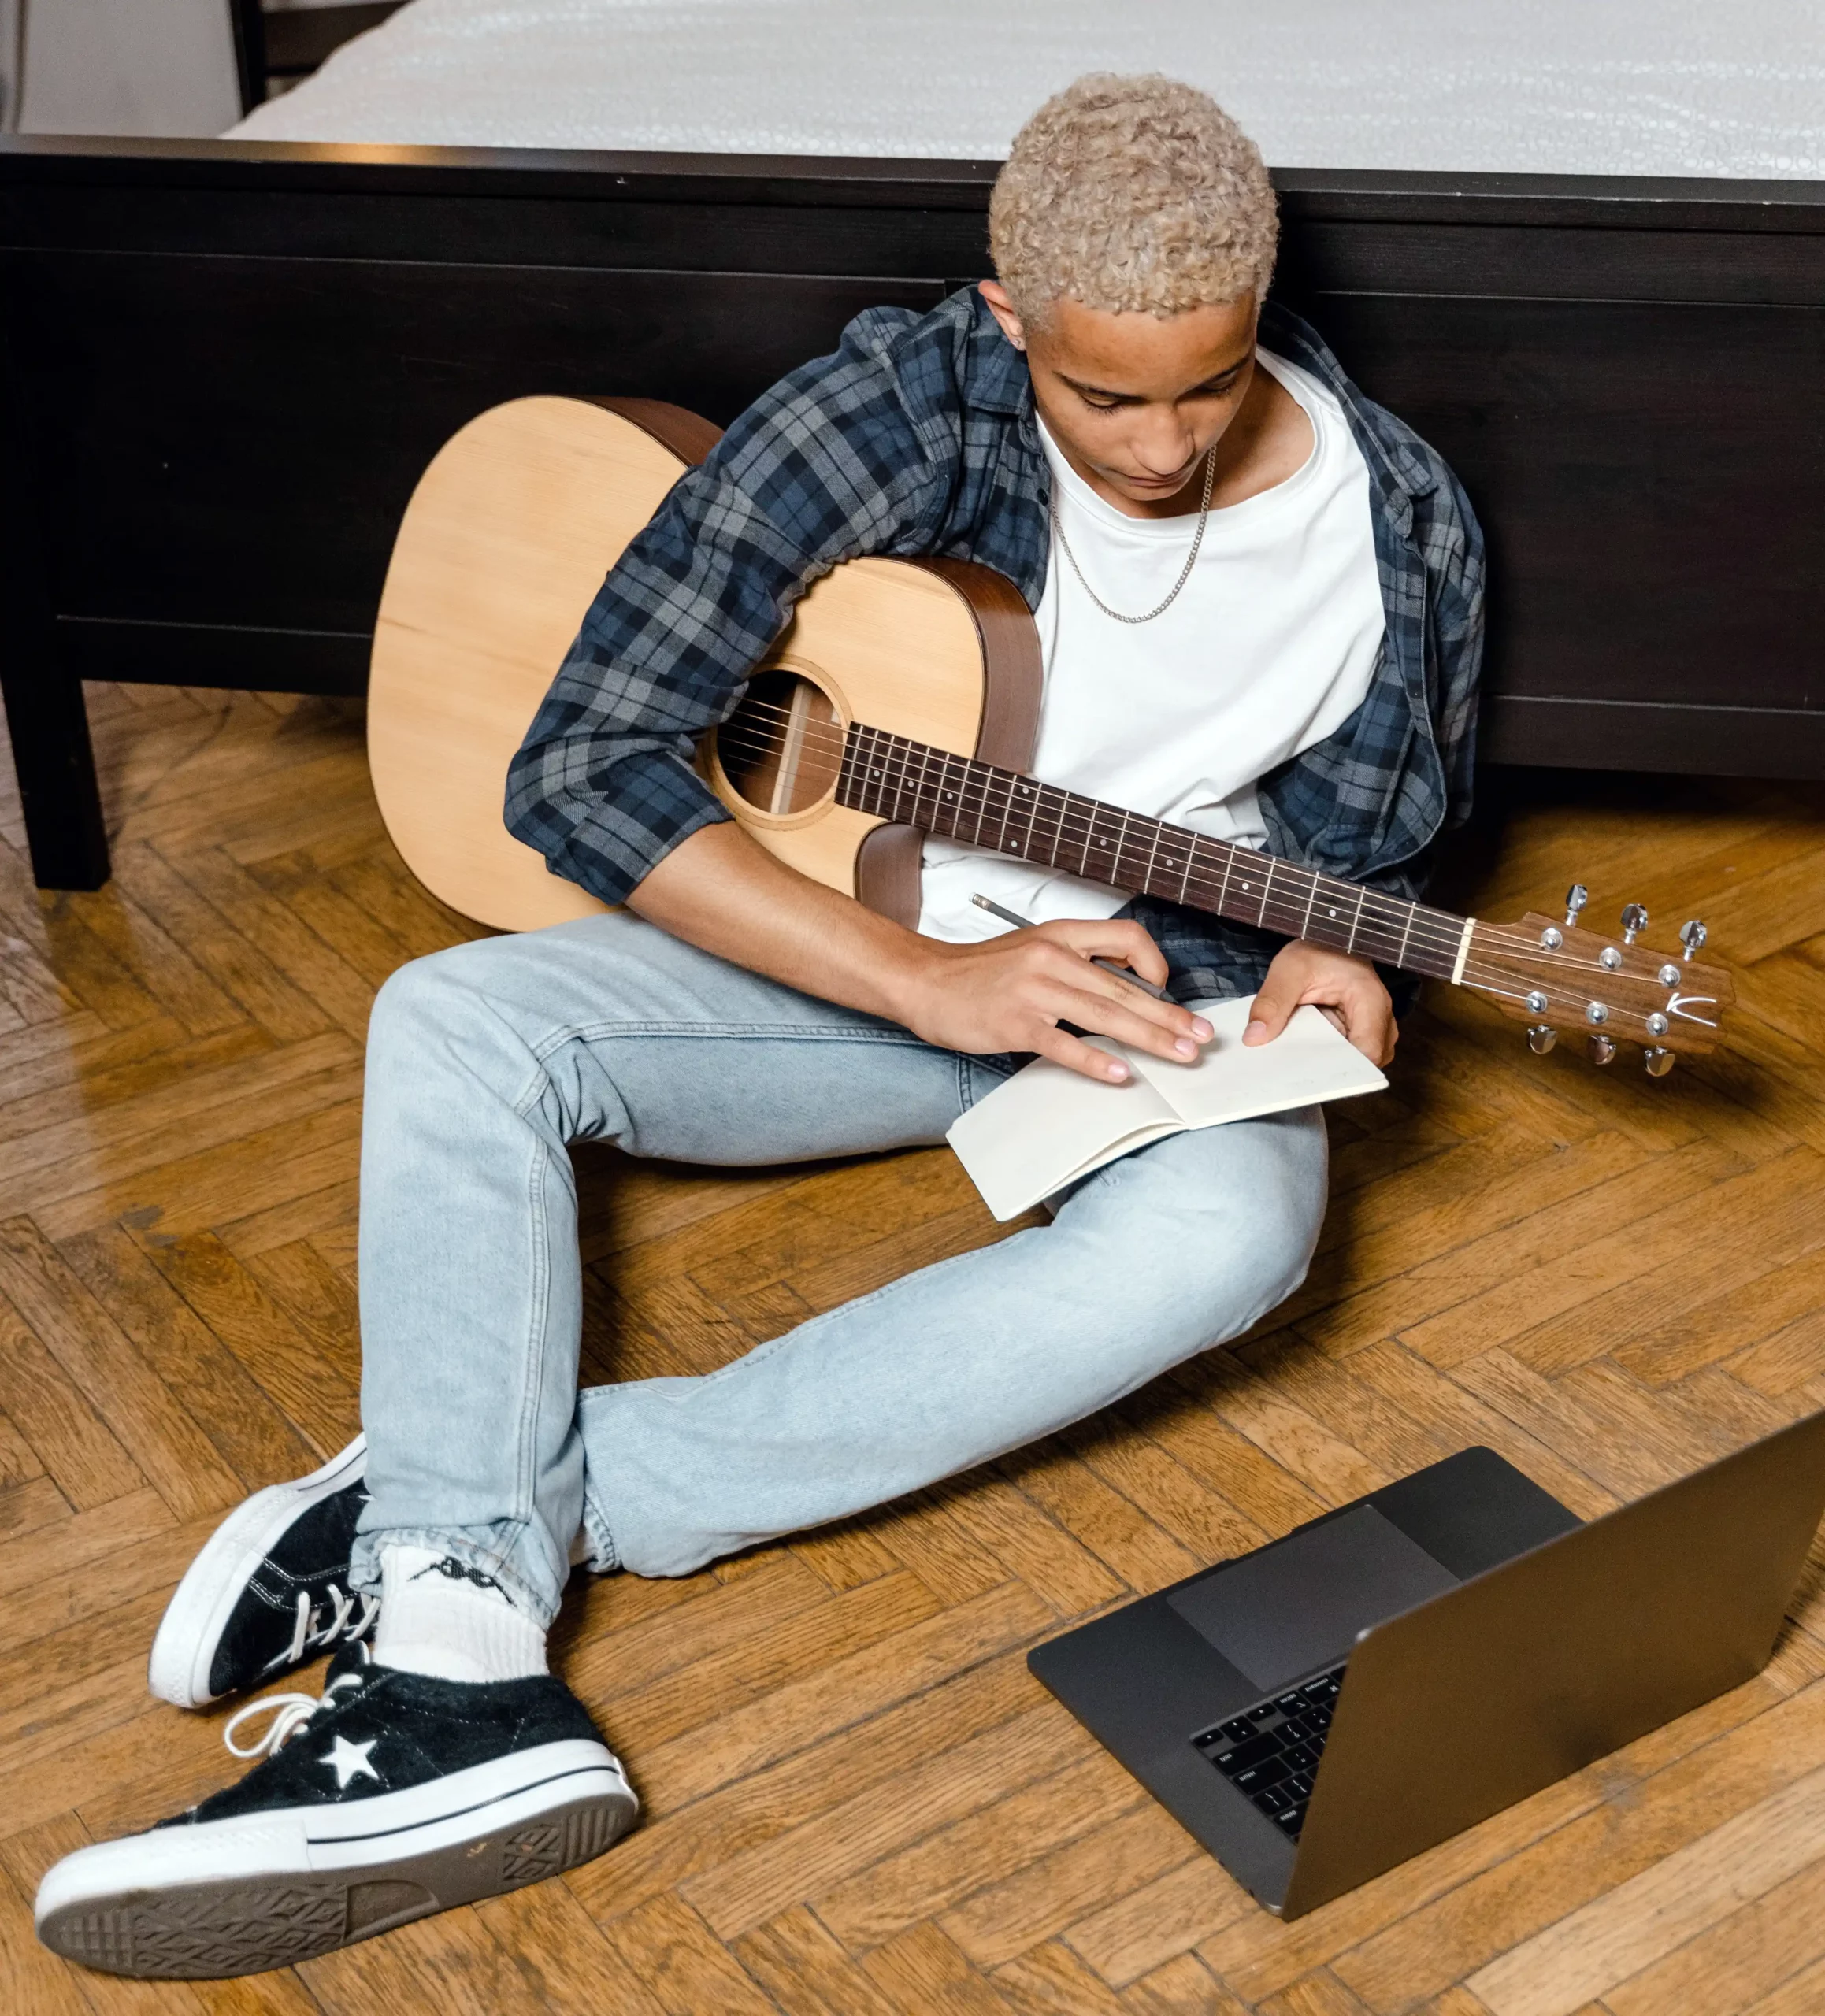 Musician with a guitar planning his social media music marketing strategy